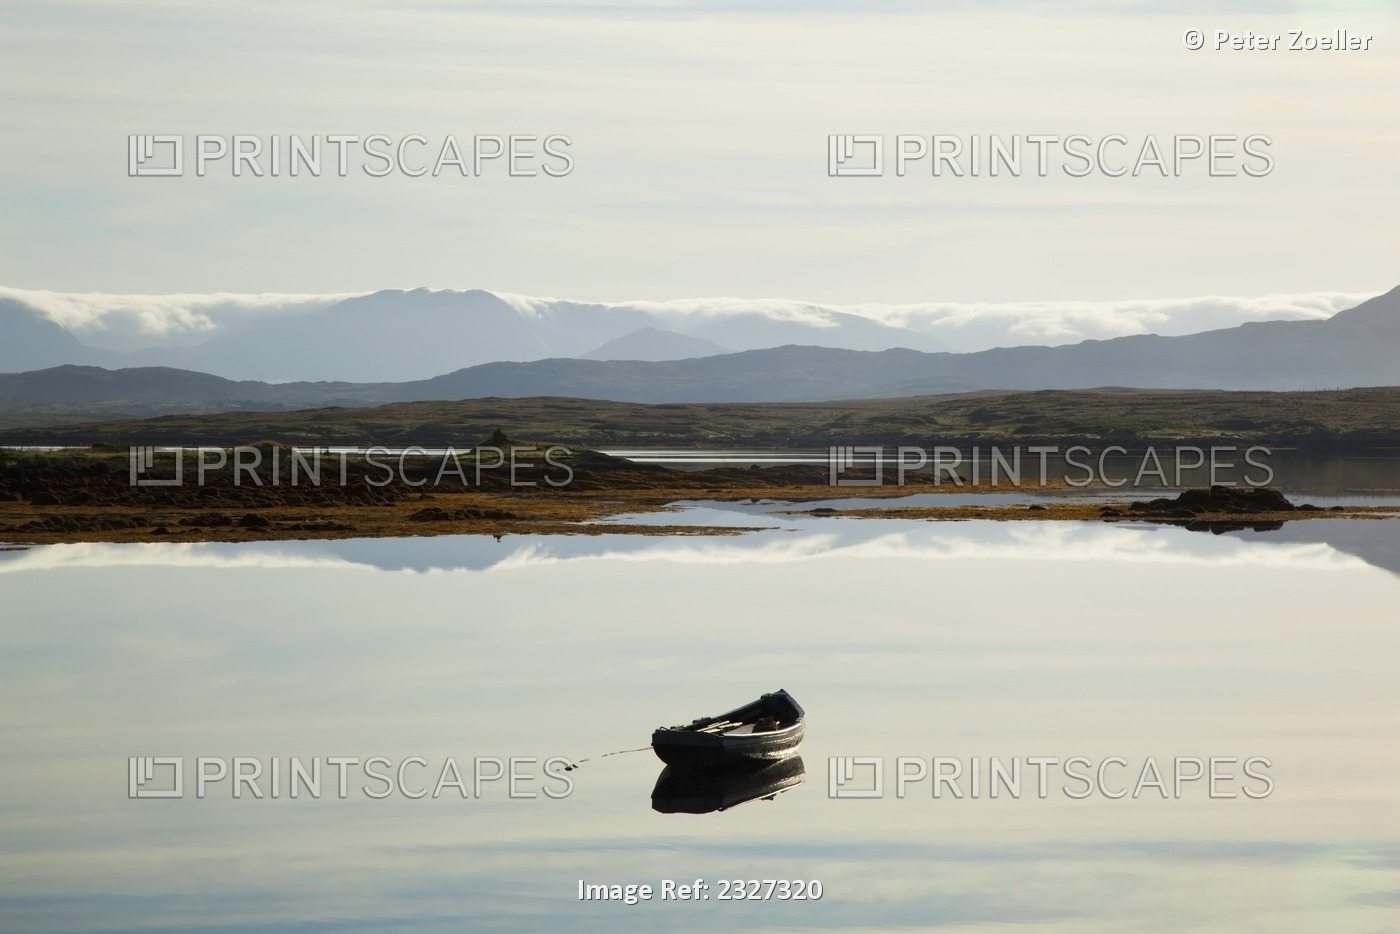 A rowboat sits in a tranquil lake with hills in the background near ...